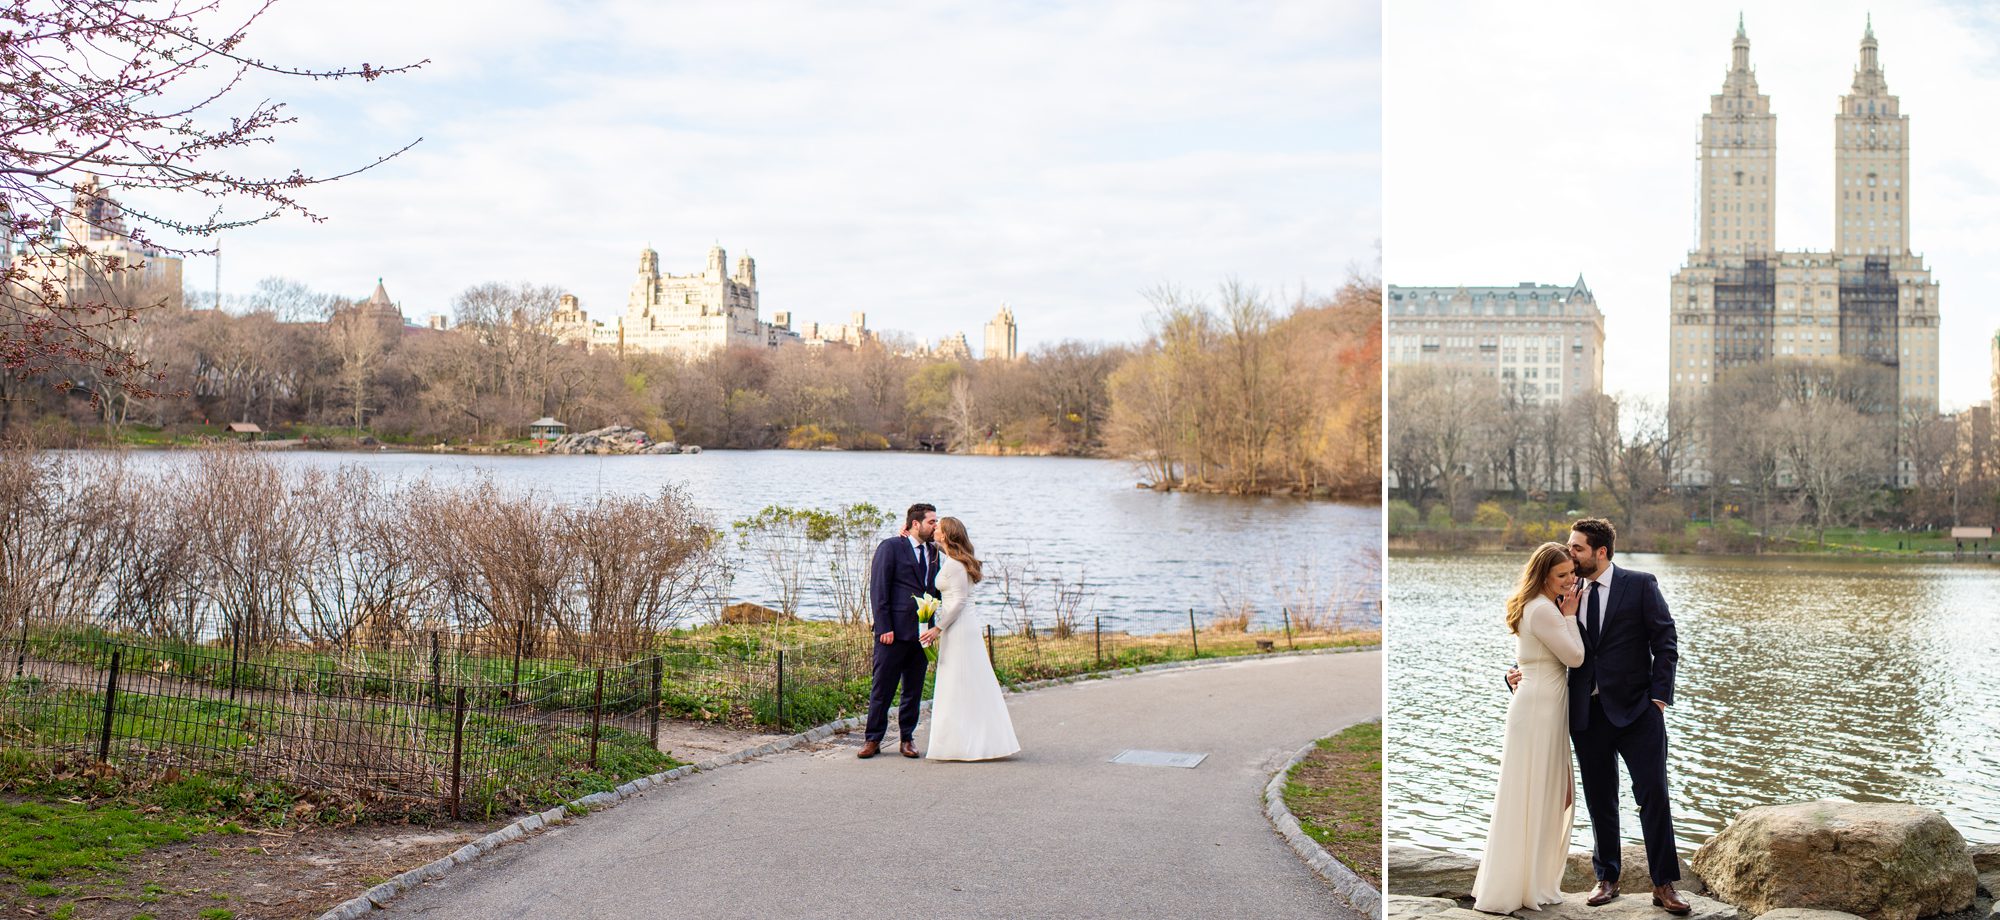 Elopement in Central Park 